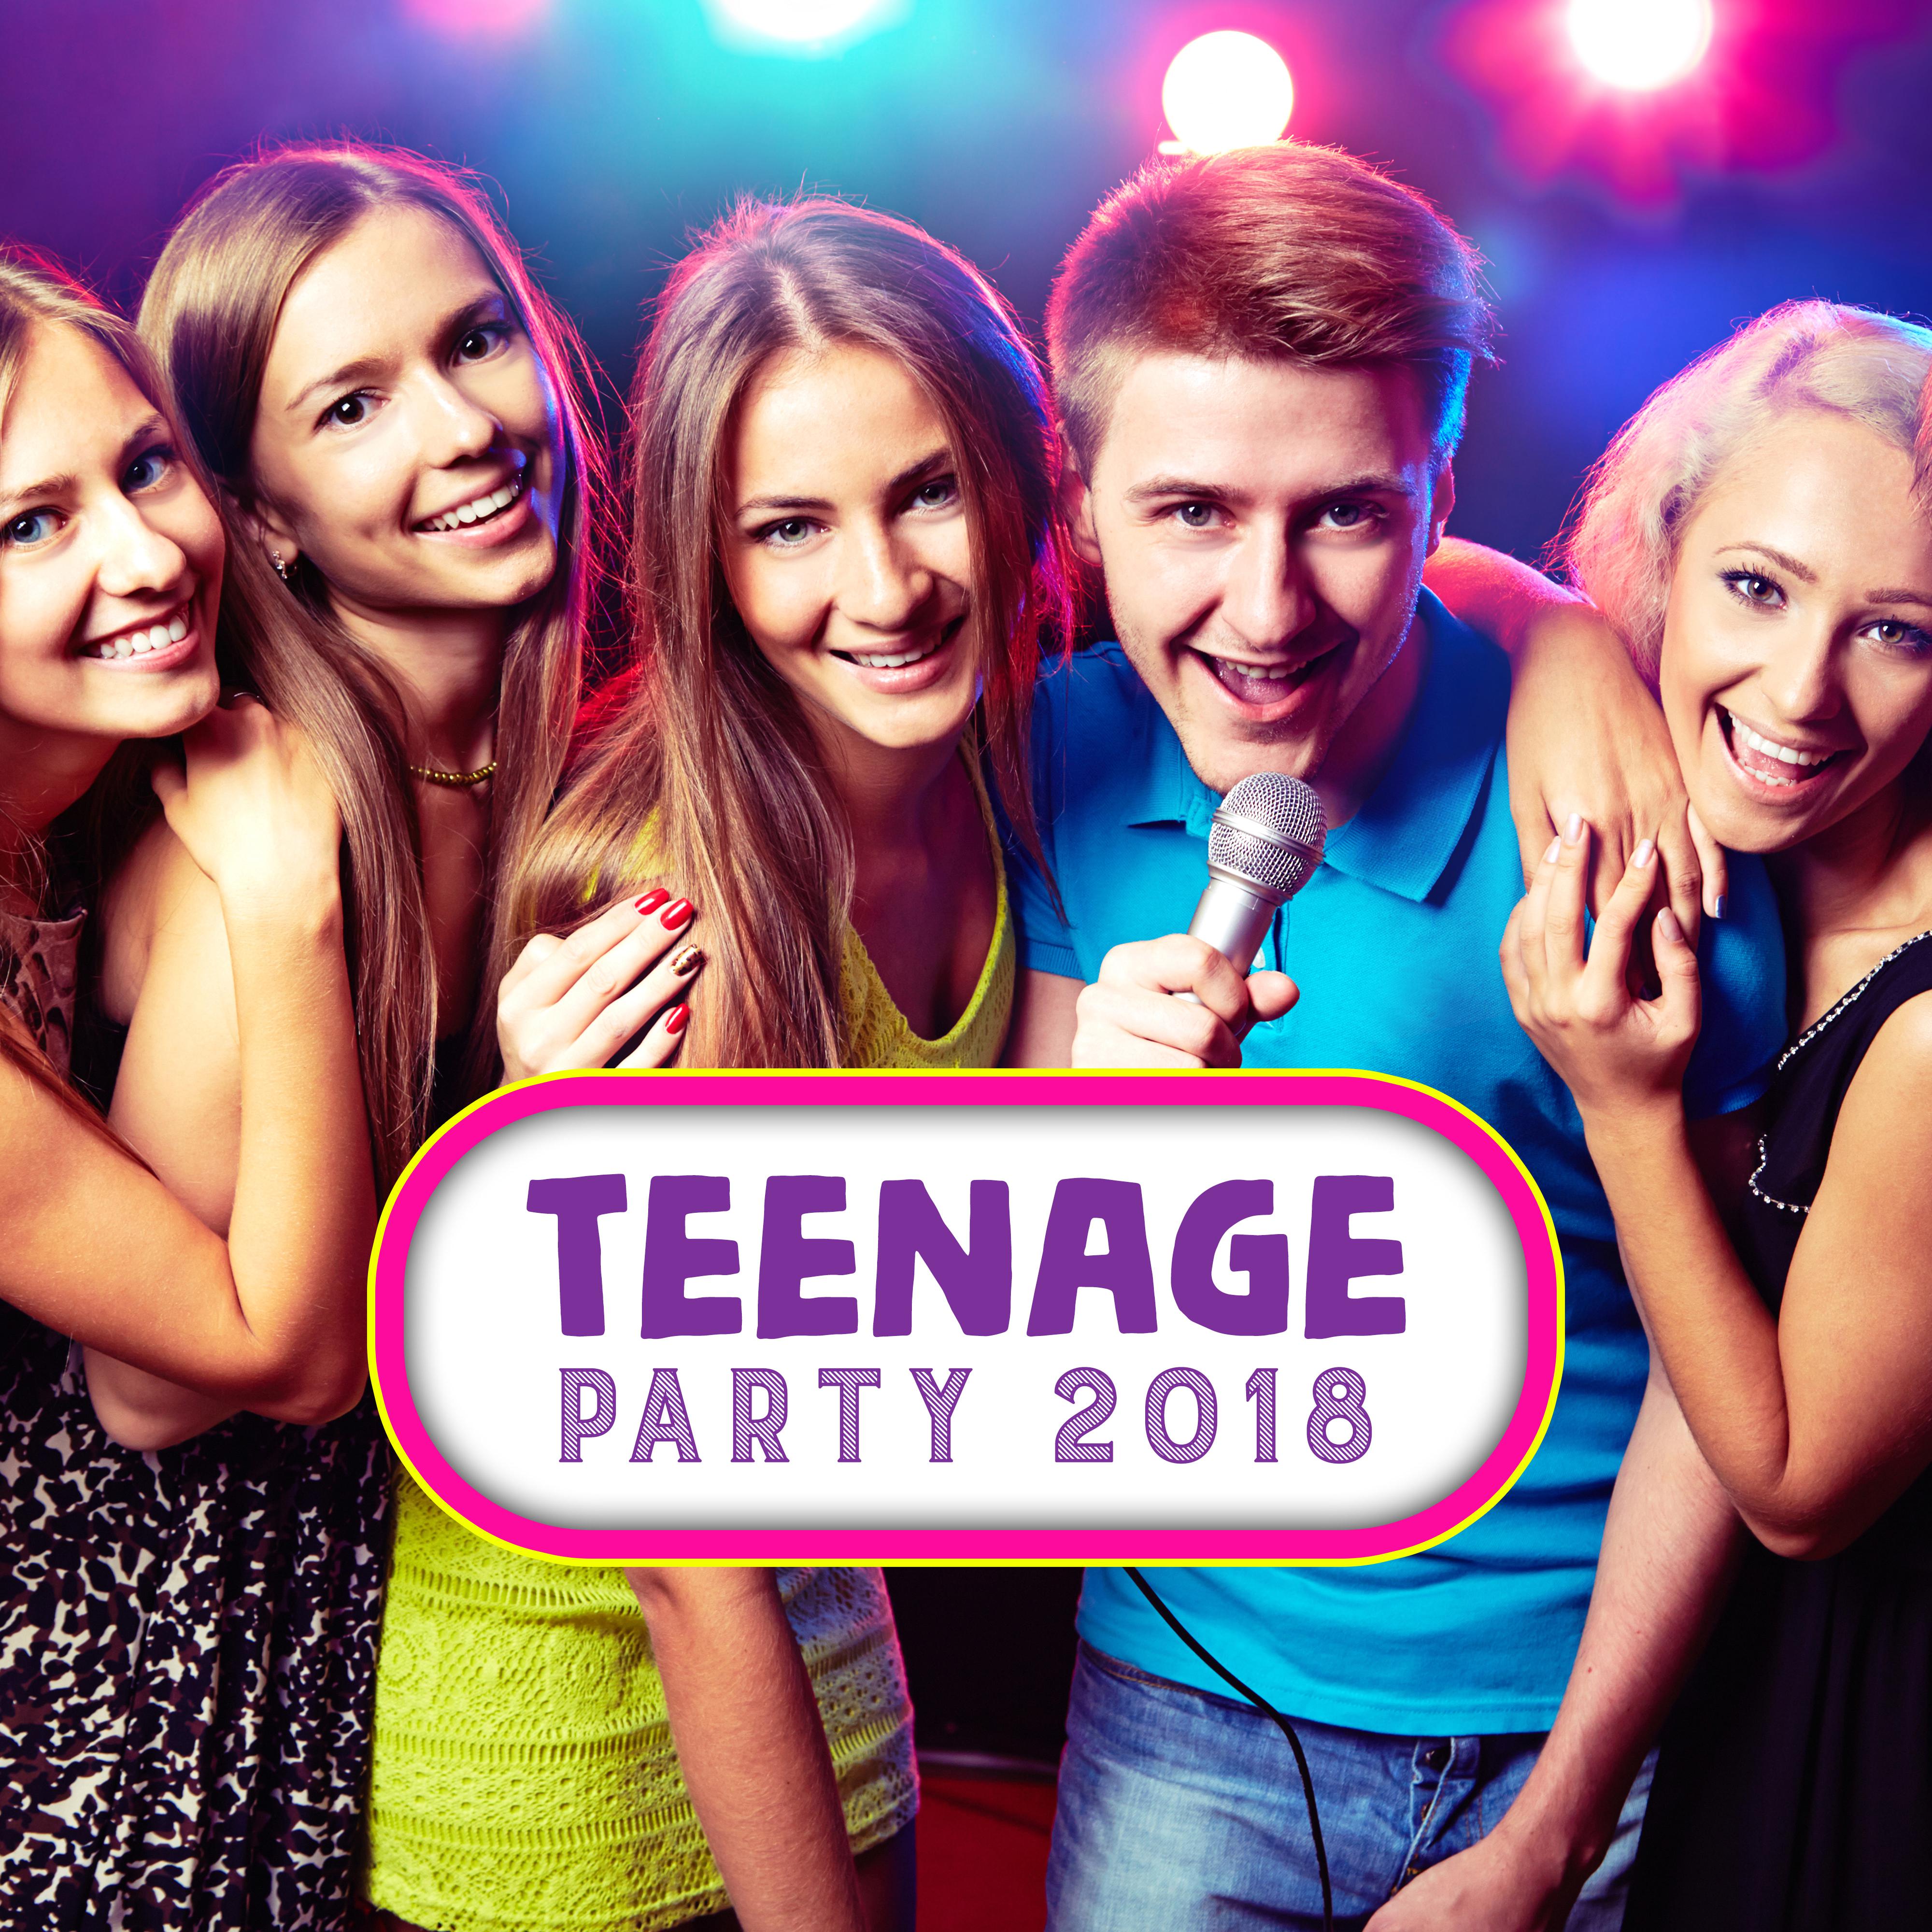 Teenage Party 2018: Dance Chillout Music